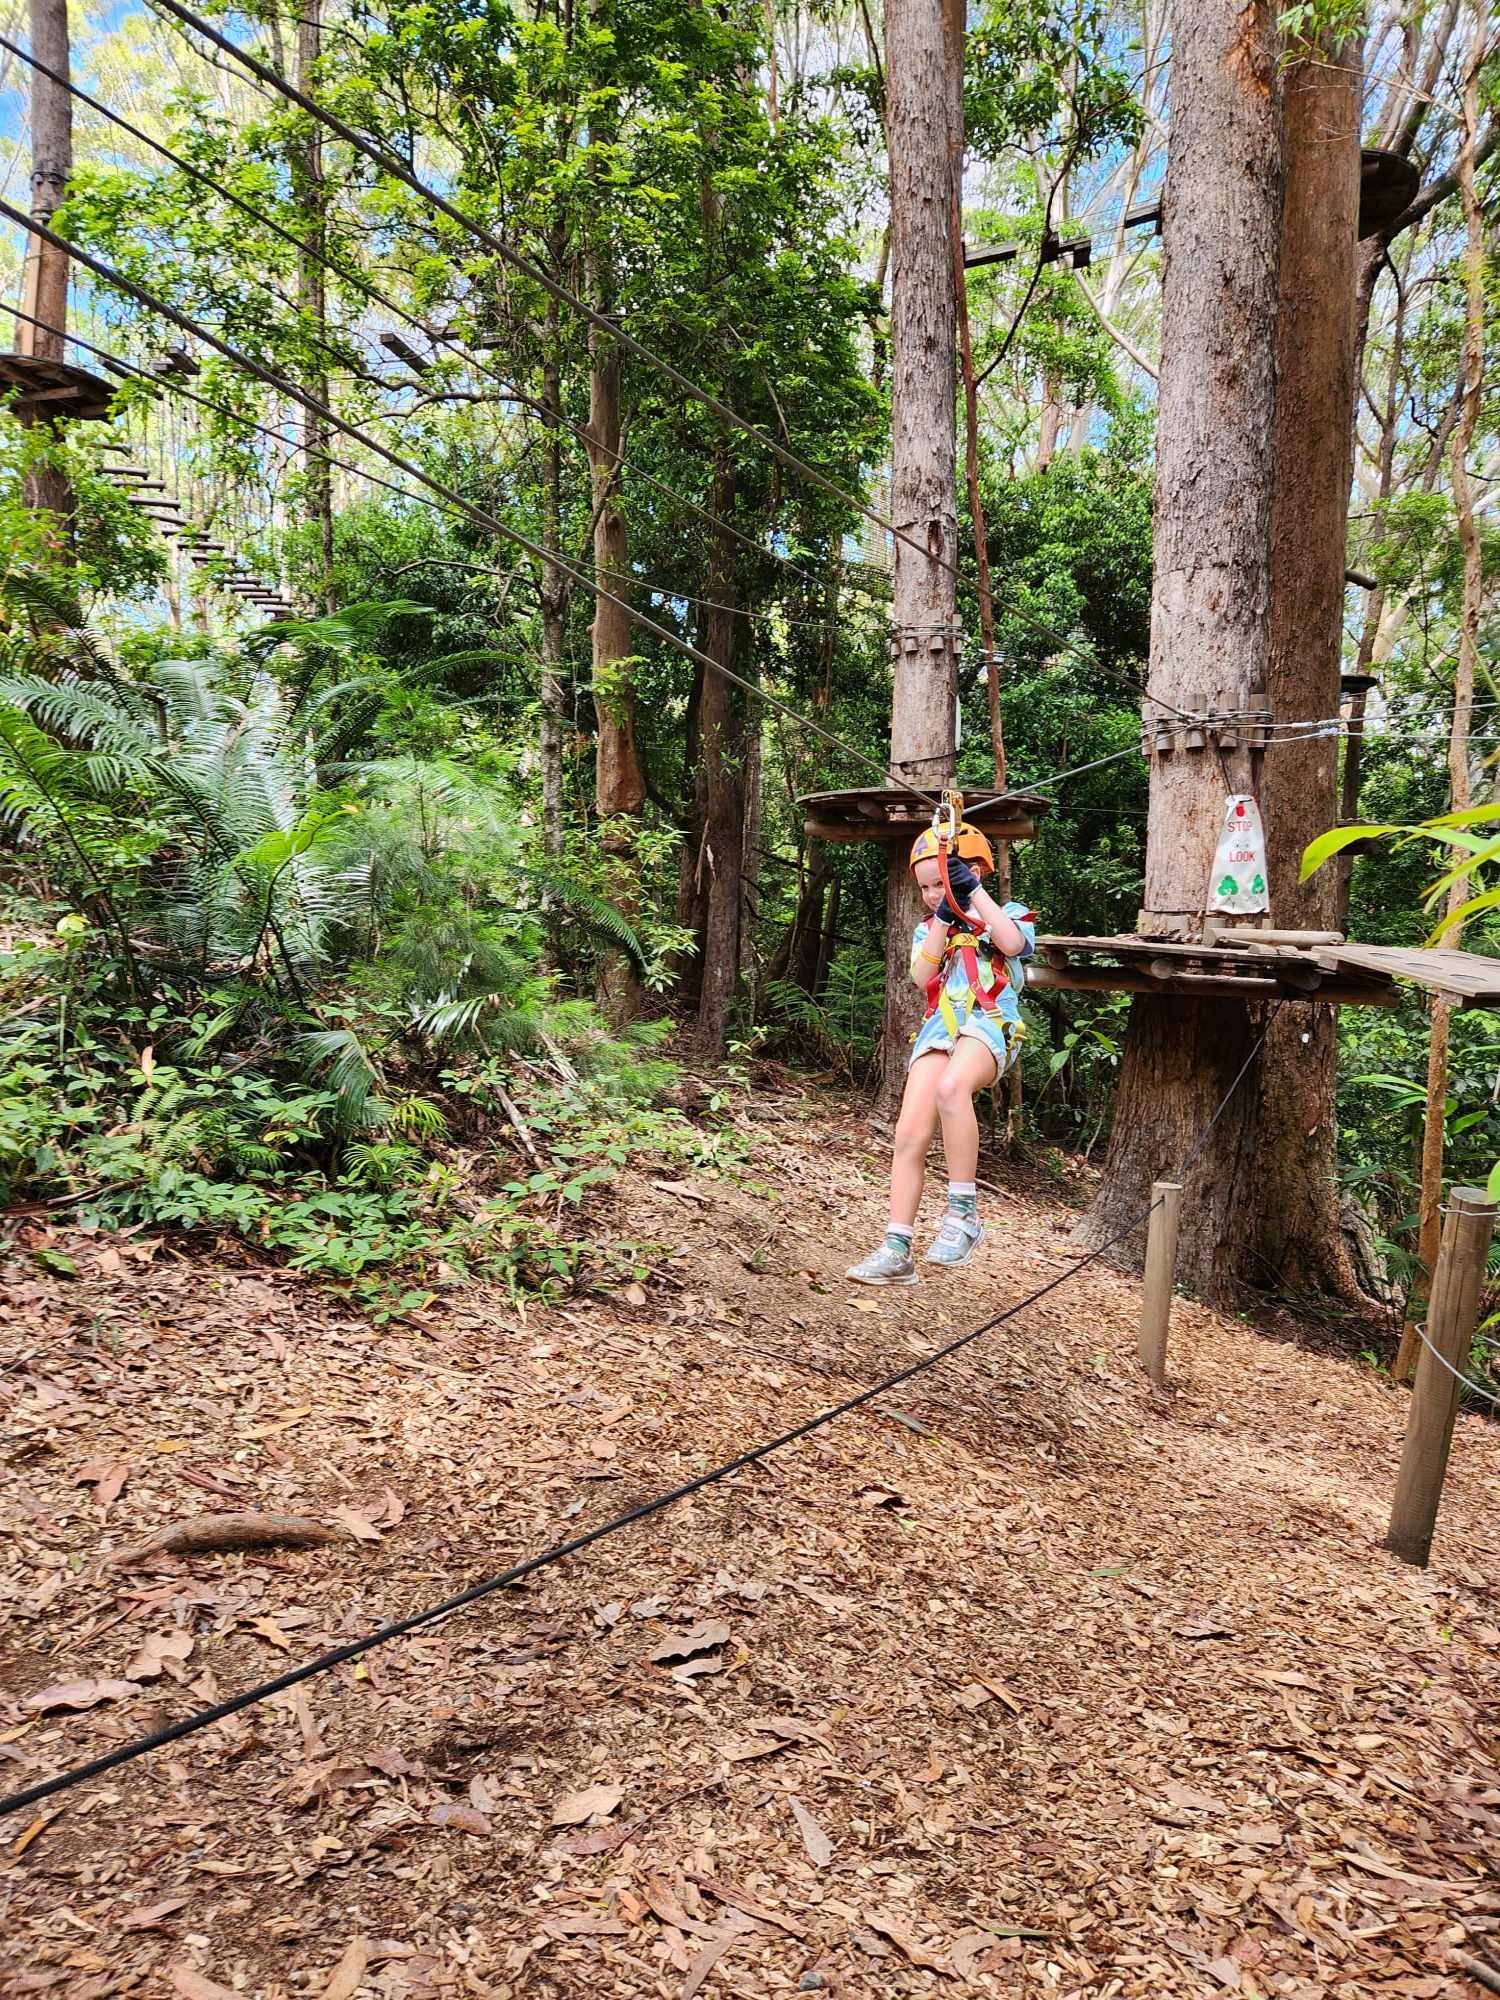 The beginner zipline for ages 3+ at Treetops Coffs